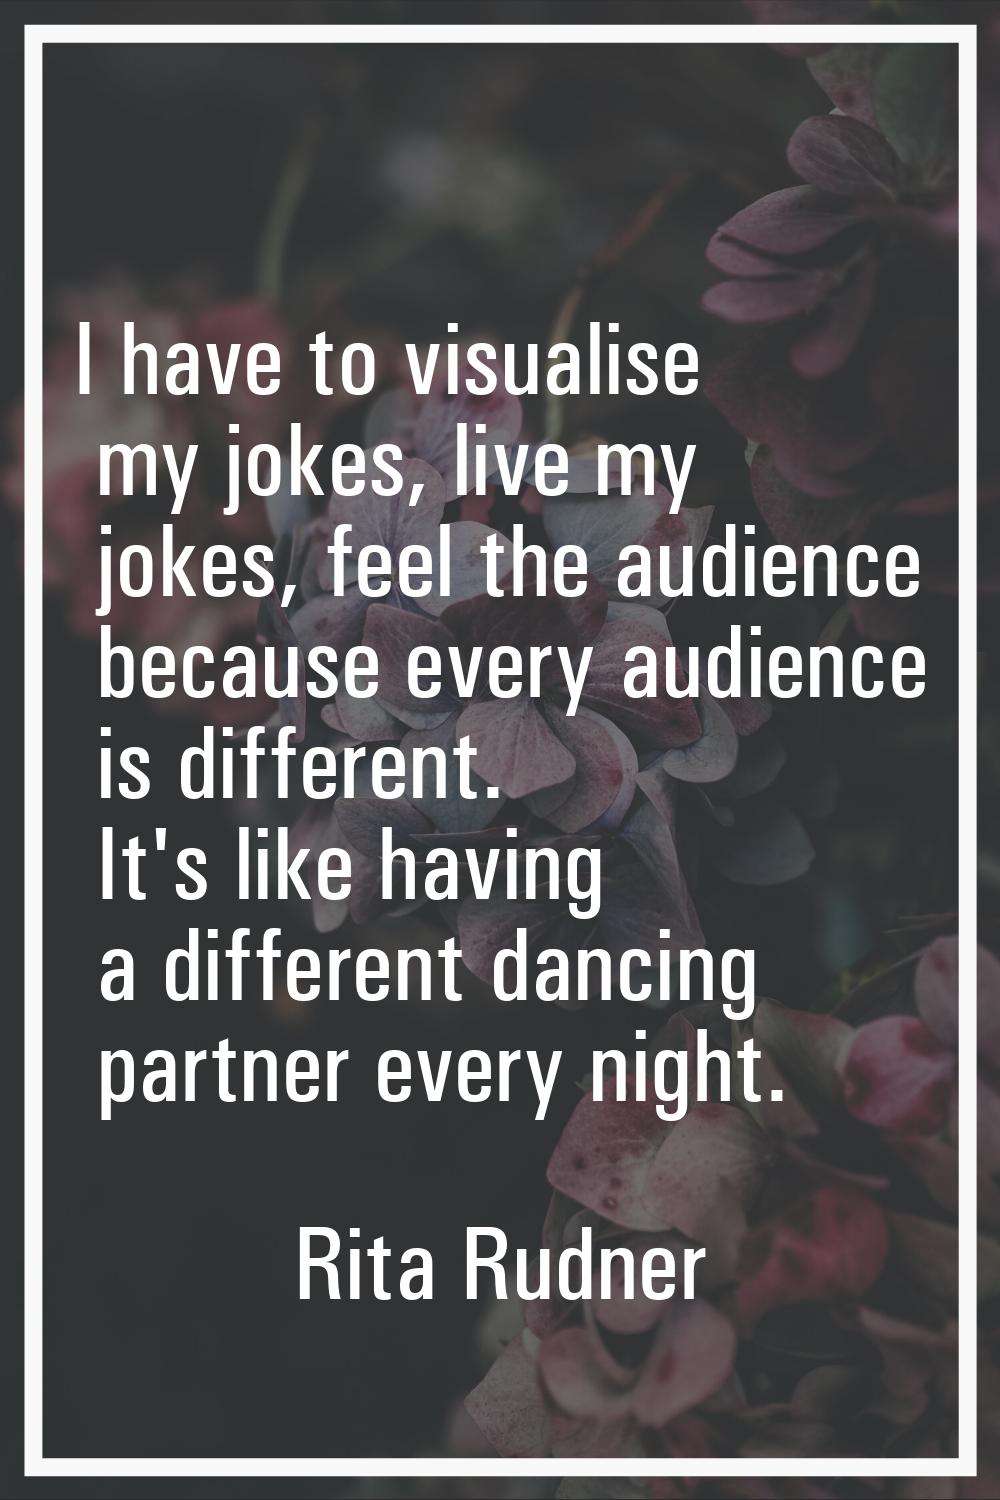 I have to visualise my jokes, live my jokes, feel the audience because every audience is different.